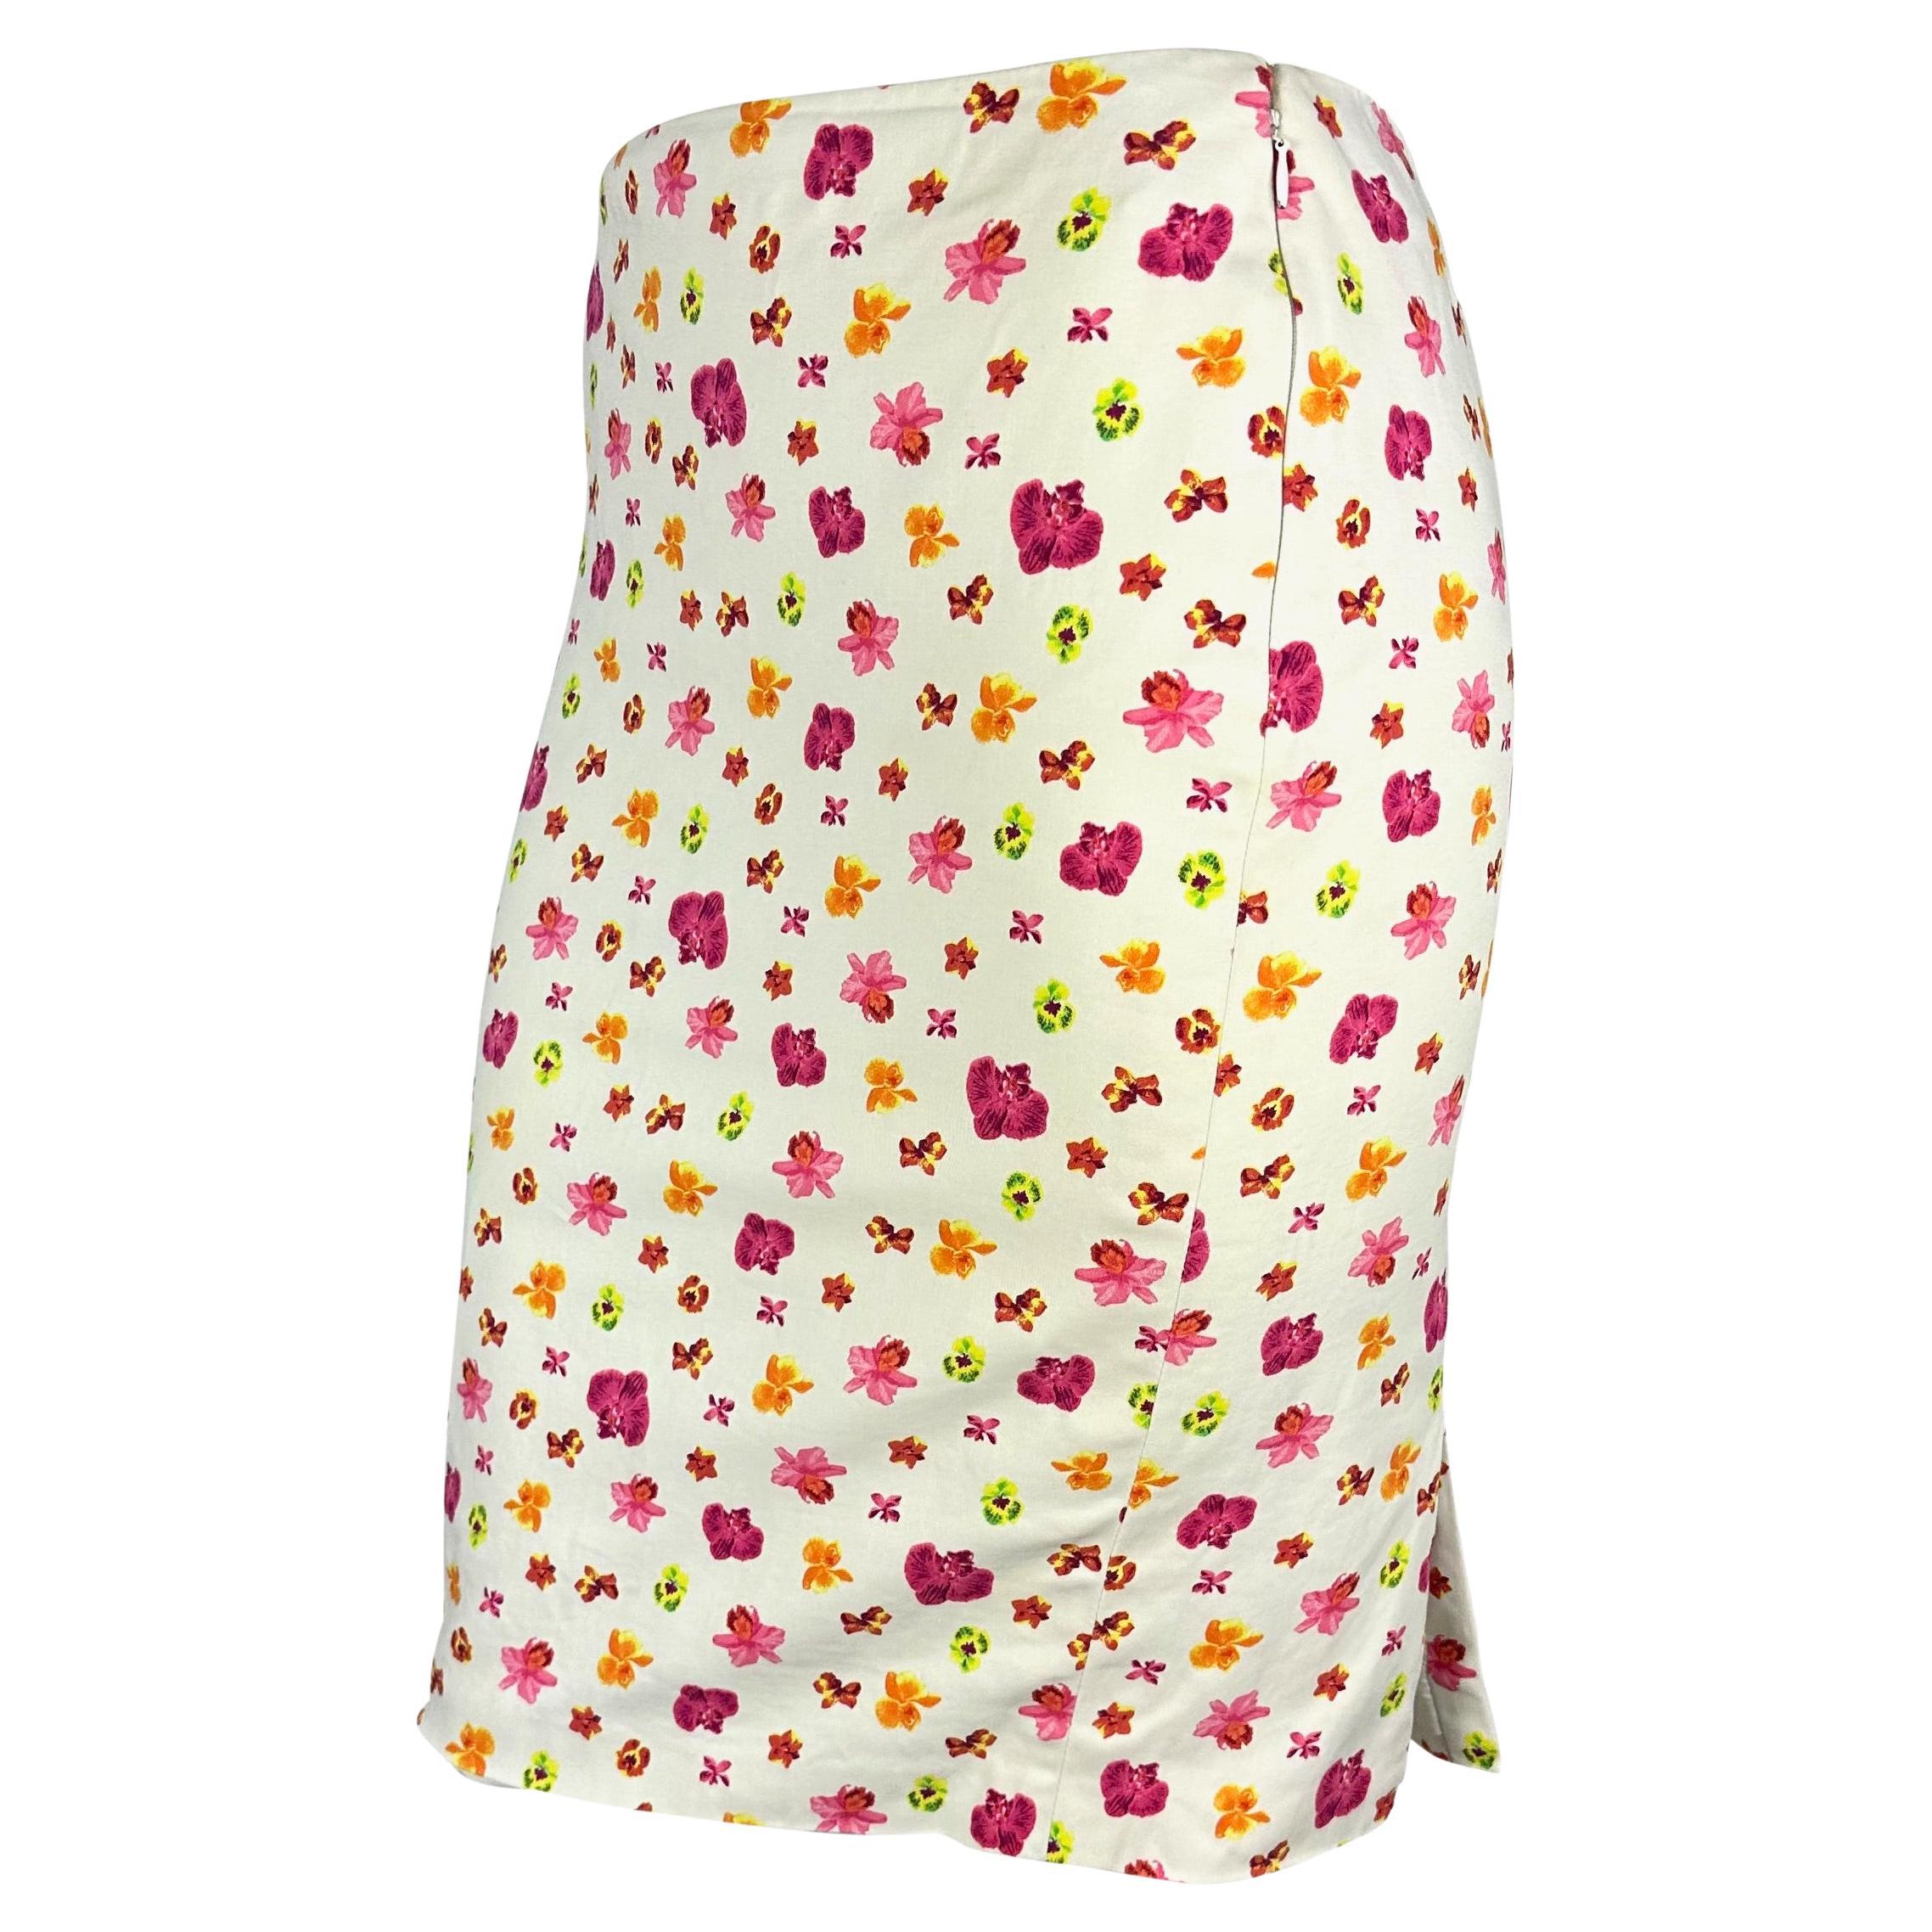 TheRealList presents: a bright floral Versace skirt, designed by Donatella Versace. From the Spring/Summer 2004 collection, this form-fitting off-white skirt is covered in vibrant pink, yellow, and orange flowers. A beautiful Y2K piece, this vibrant